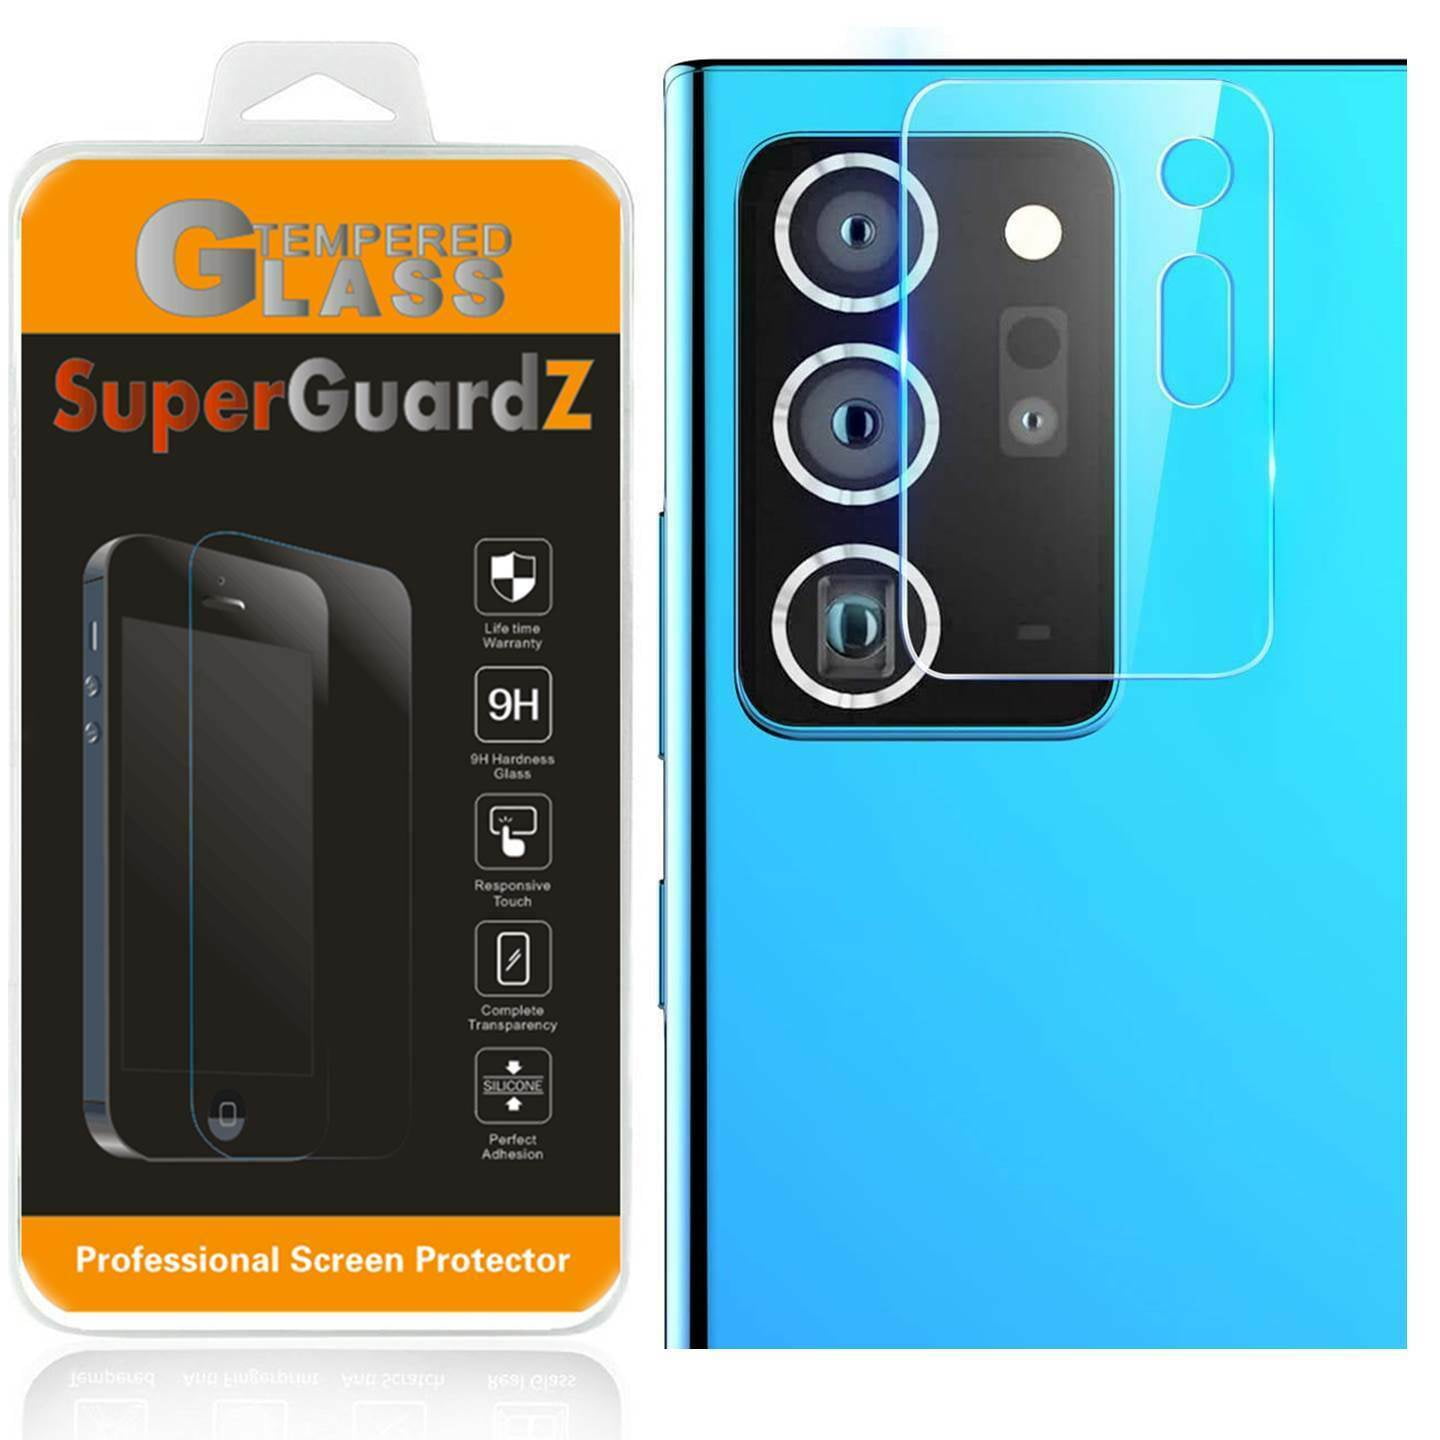 Galaxy Note 20 Ultra Screen Protector Include 2 Pack Tempered Glass Screen Protector 2+2 Pack 2 Pack Tempered Glass Camera Lens Protector,3D Curved,HD Clear,Anti-Scratch for Galaxy Note 20 Ultra 5G 